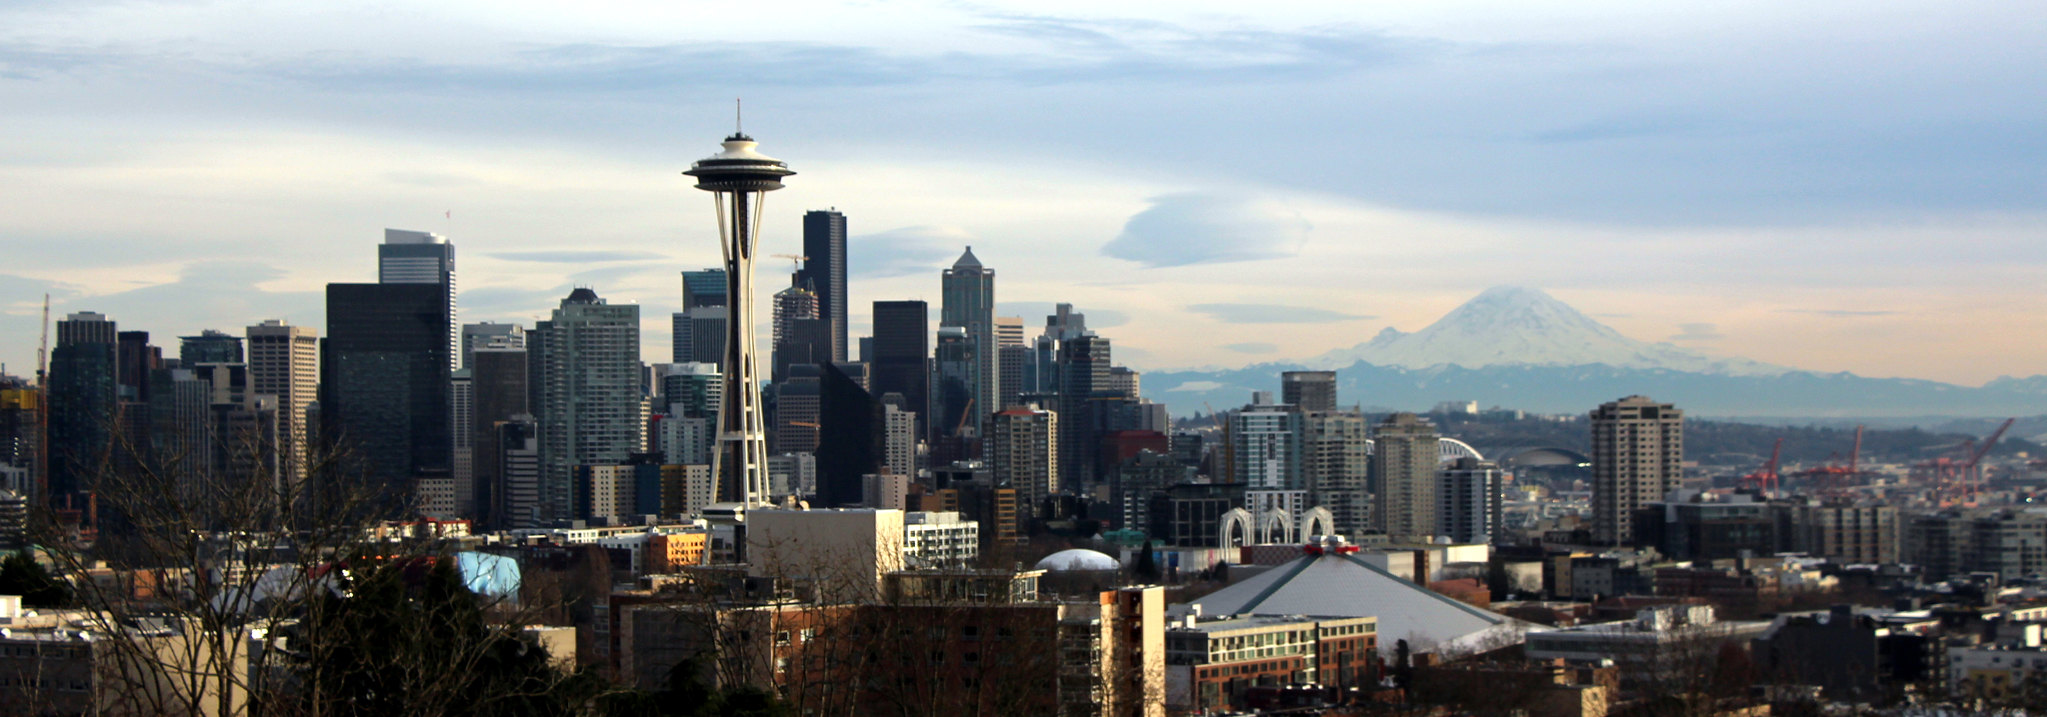 The beautiful Seattle skyline from Kerry Park.